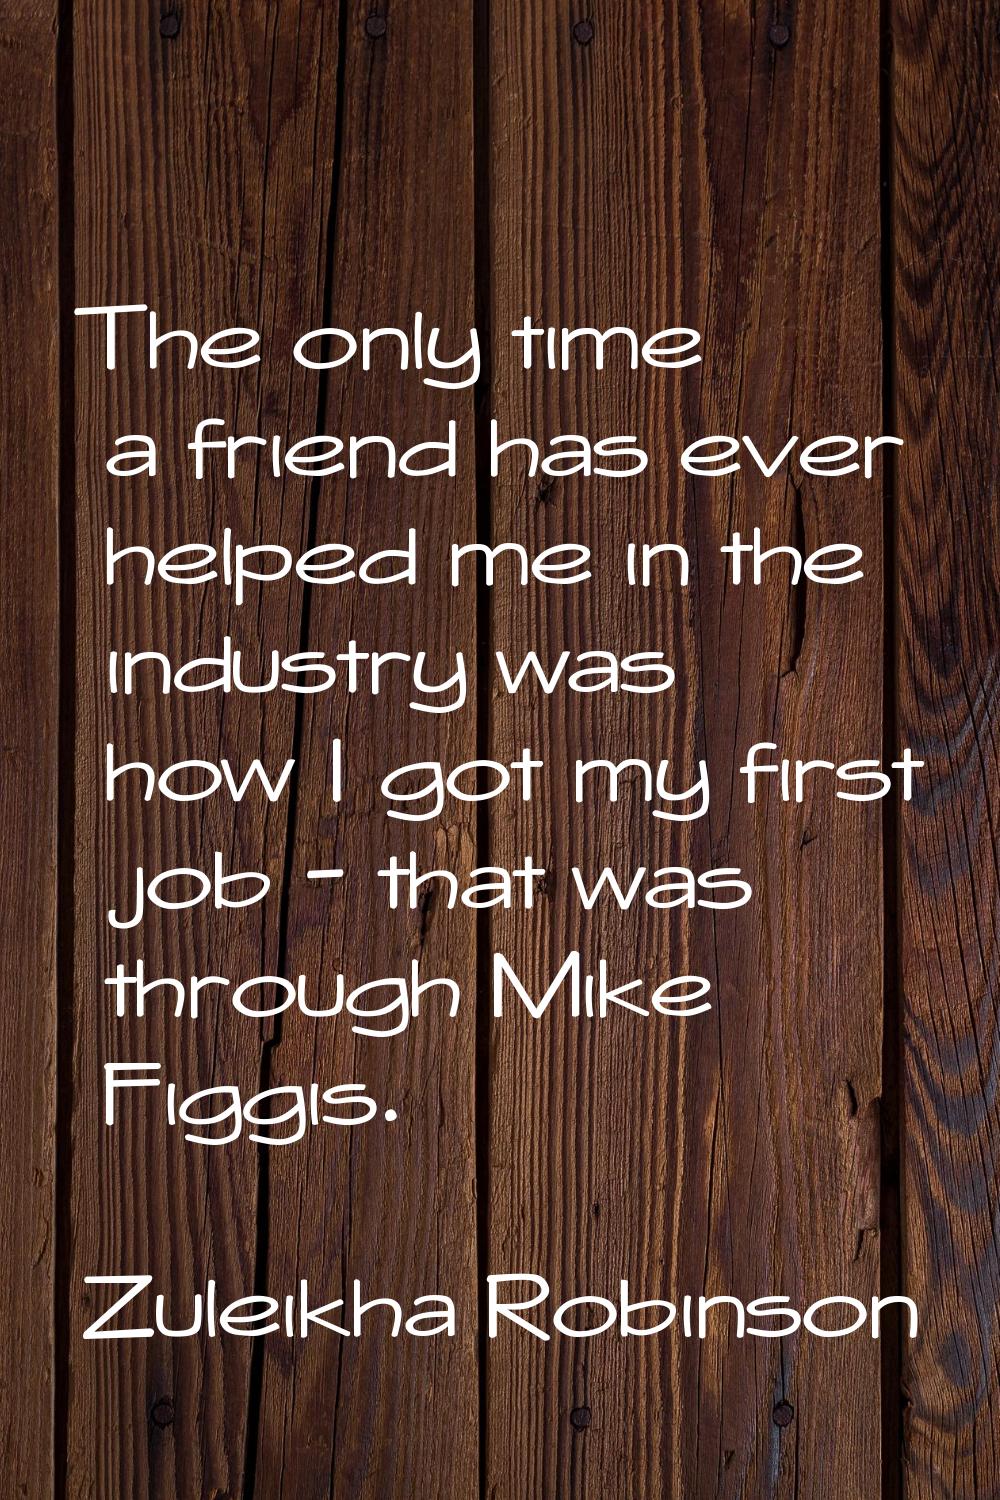 The only time a friend has ever helped me in the industry was how I got my first job - that was thr